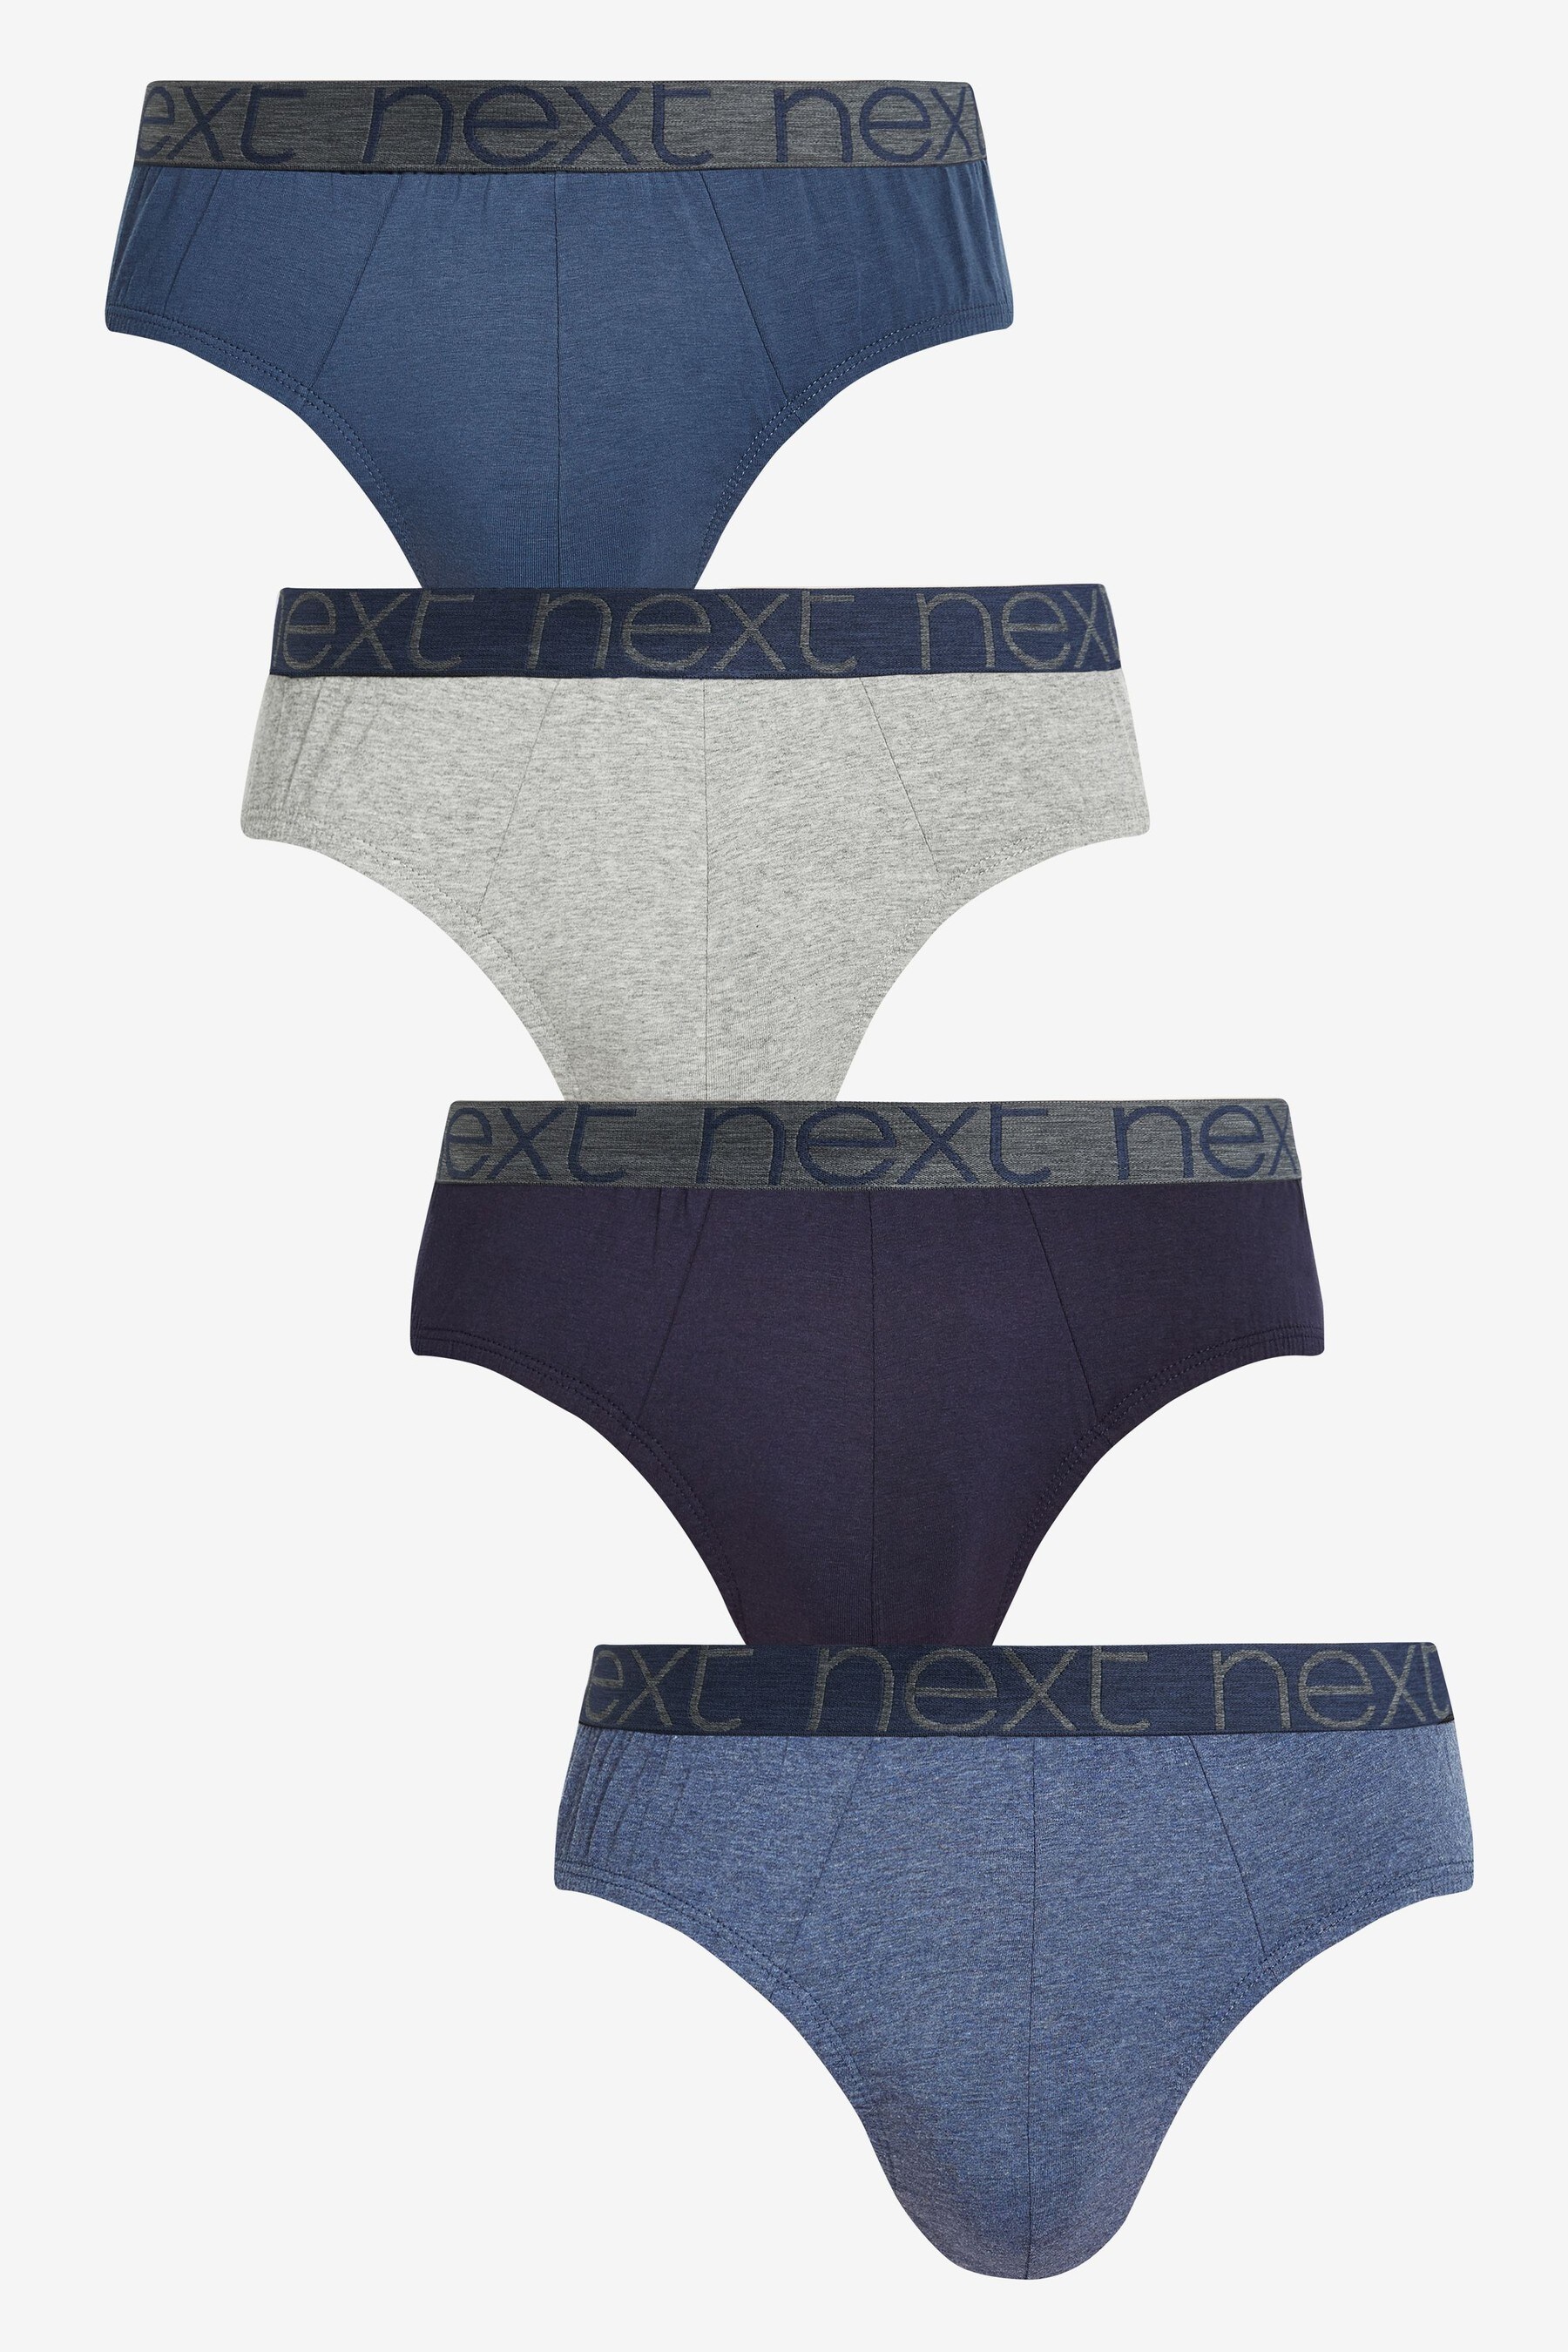 Buy Blue 4 pack Cotton Rich Briefs from the Next UK online shop